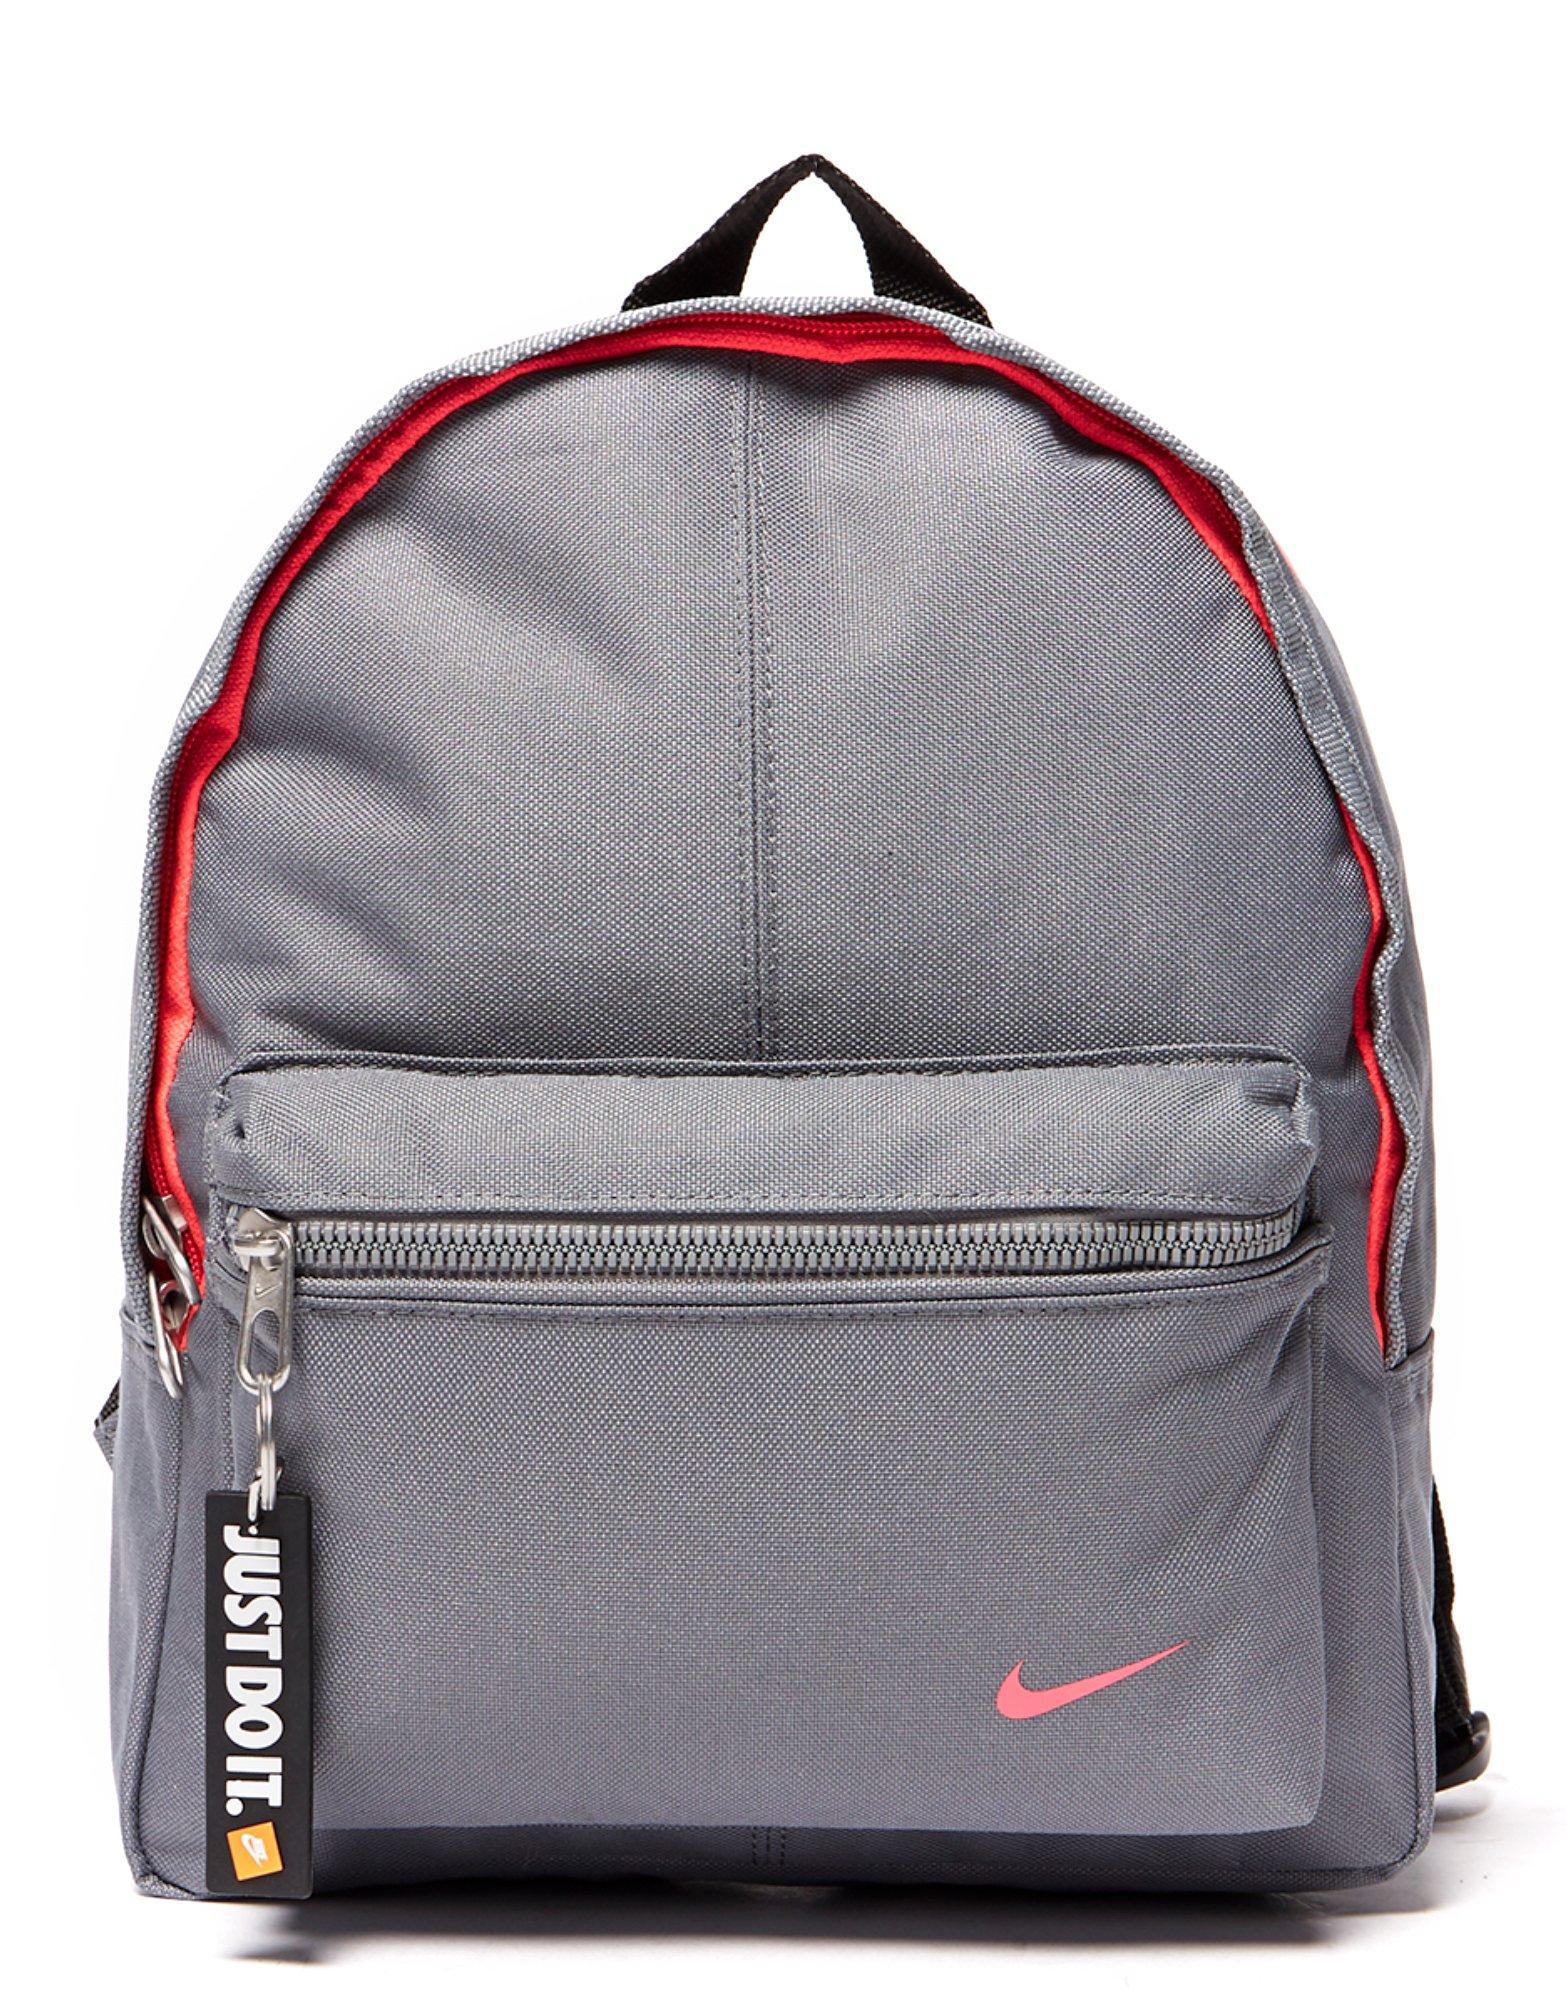 Nike Synthetic Classic Mini Backpack in Grey/Pink (Gray) for Men - Lyst